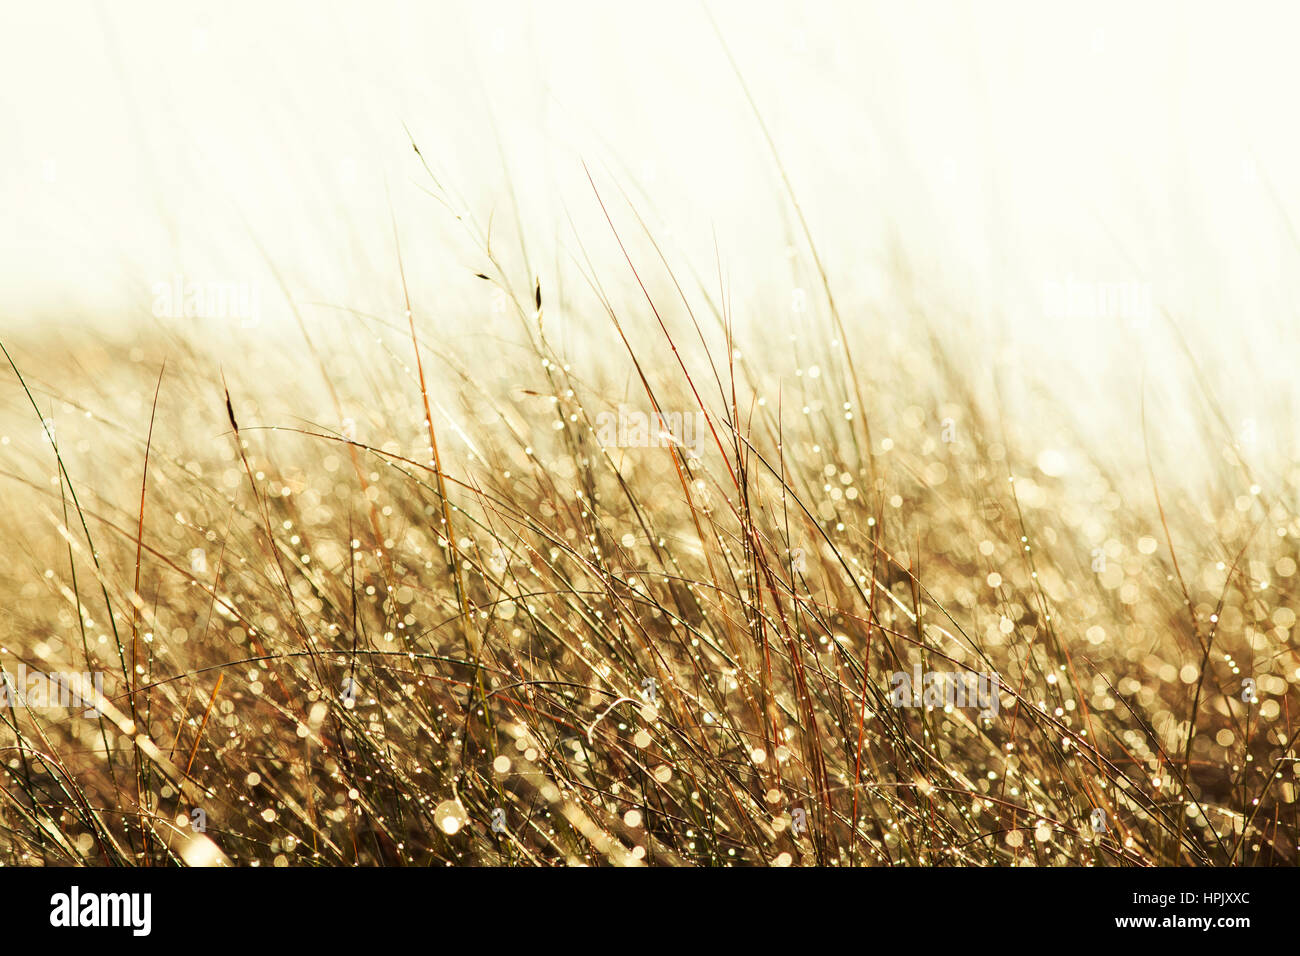 Water droplets glisten on beach grass during sunset. Stock Photo